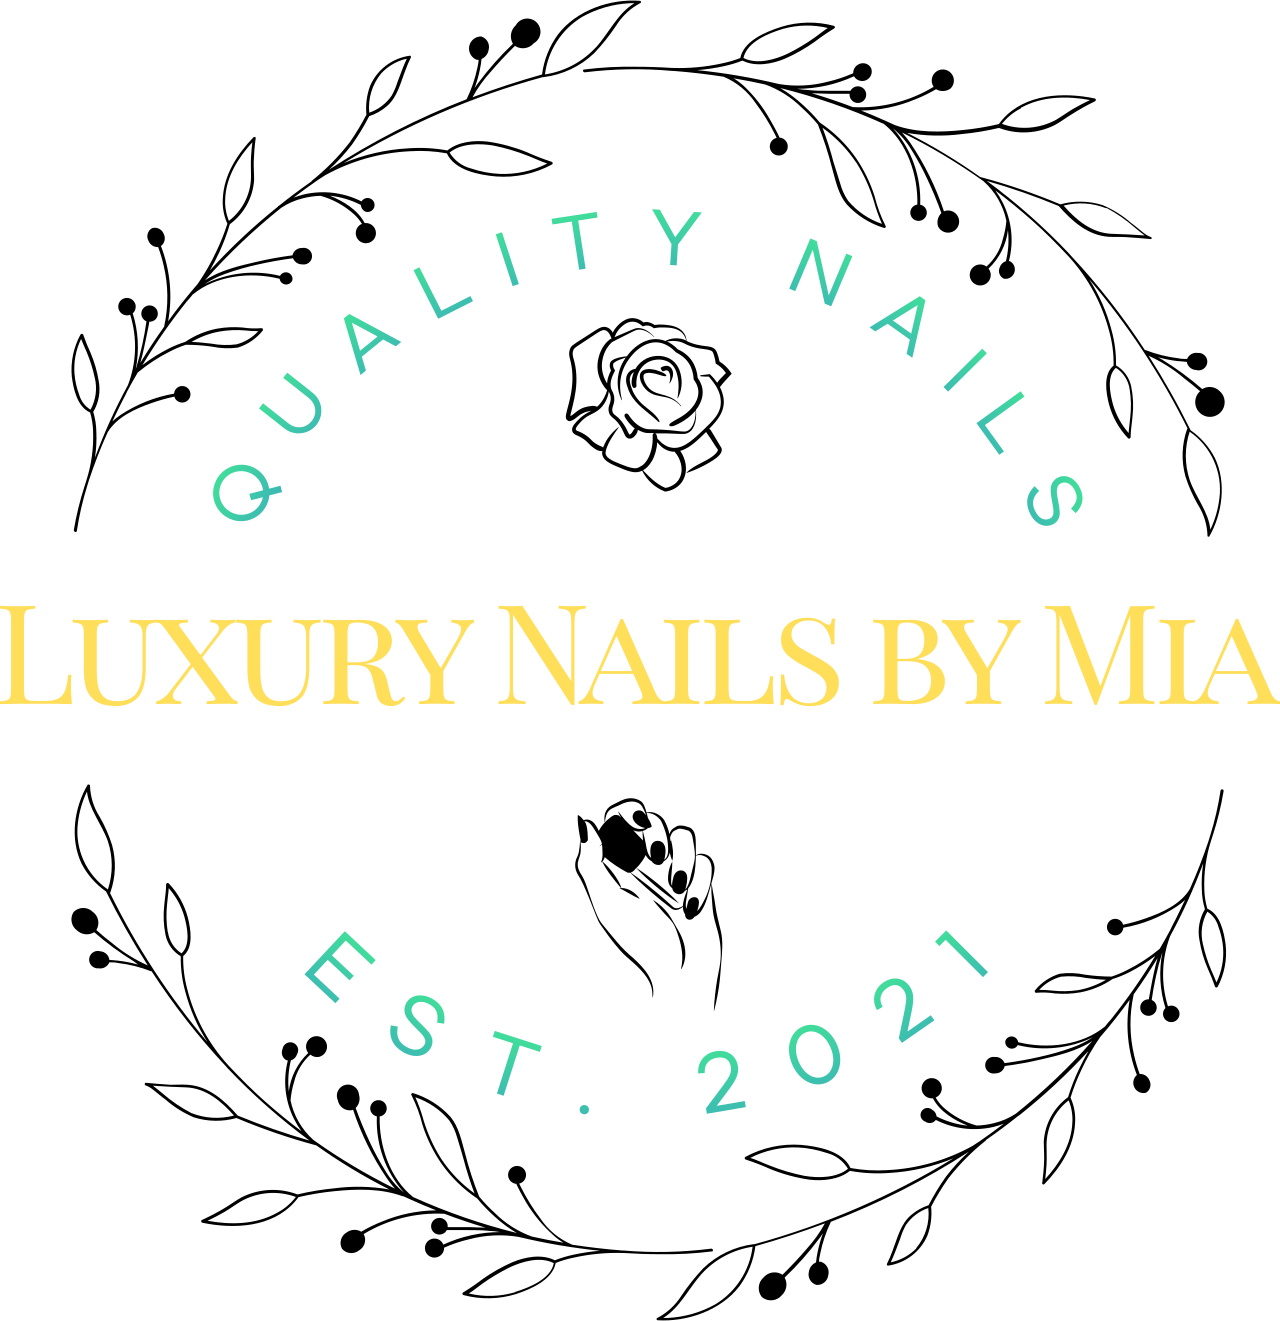 Luxury Nails by Mia 's web page